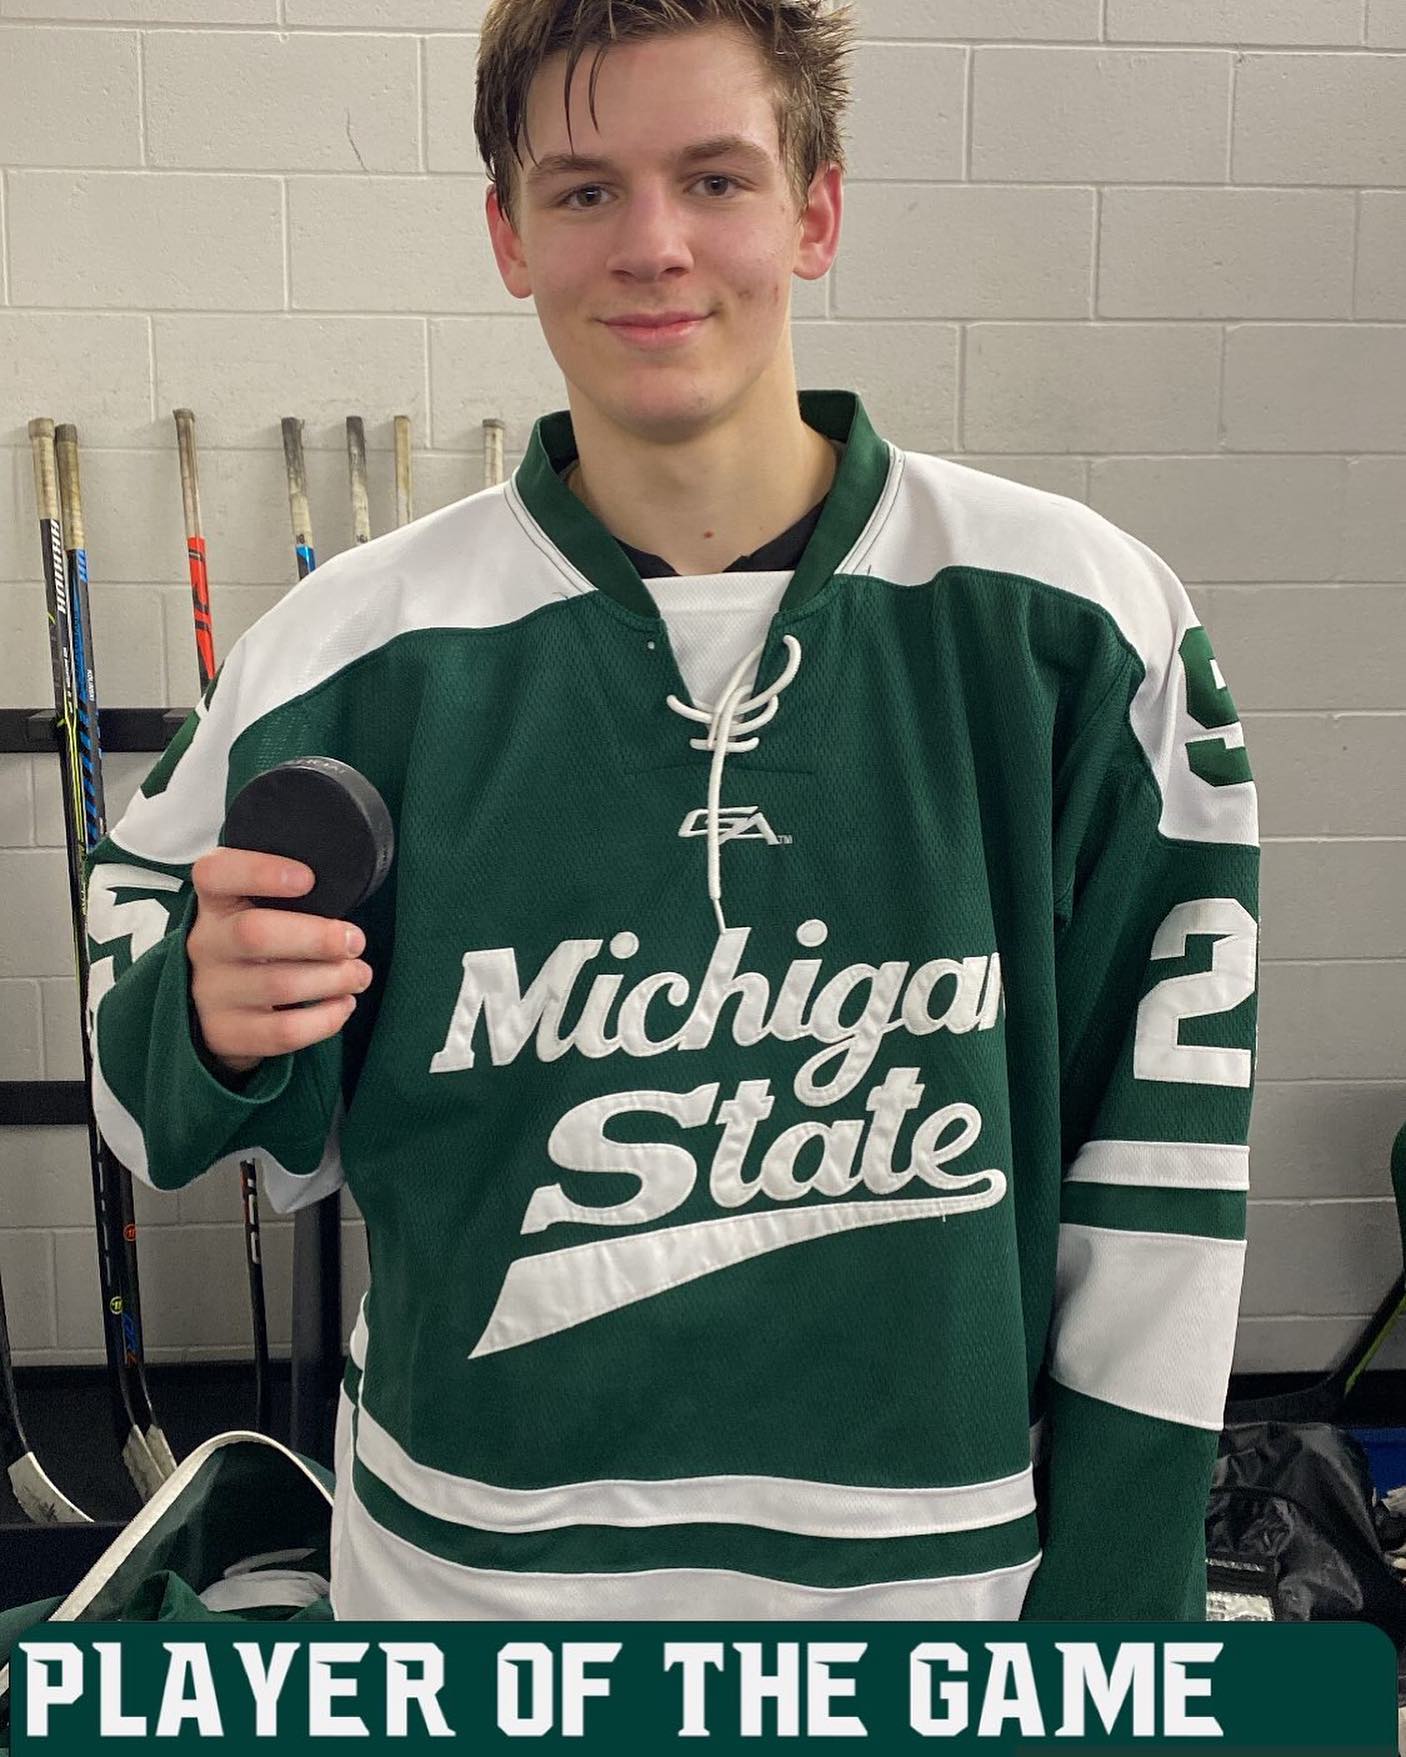 @nich_borchardt nets 3 goals on a single shift and powers the Spartans past GVSU 8-7, earning the distinction as the @therivieracafe player of the game!! #TheRealBorch